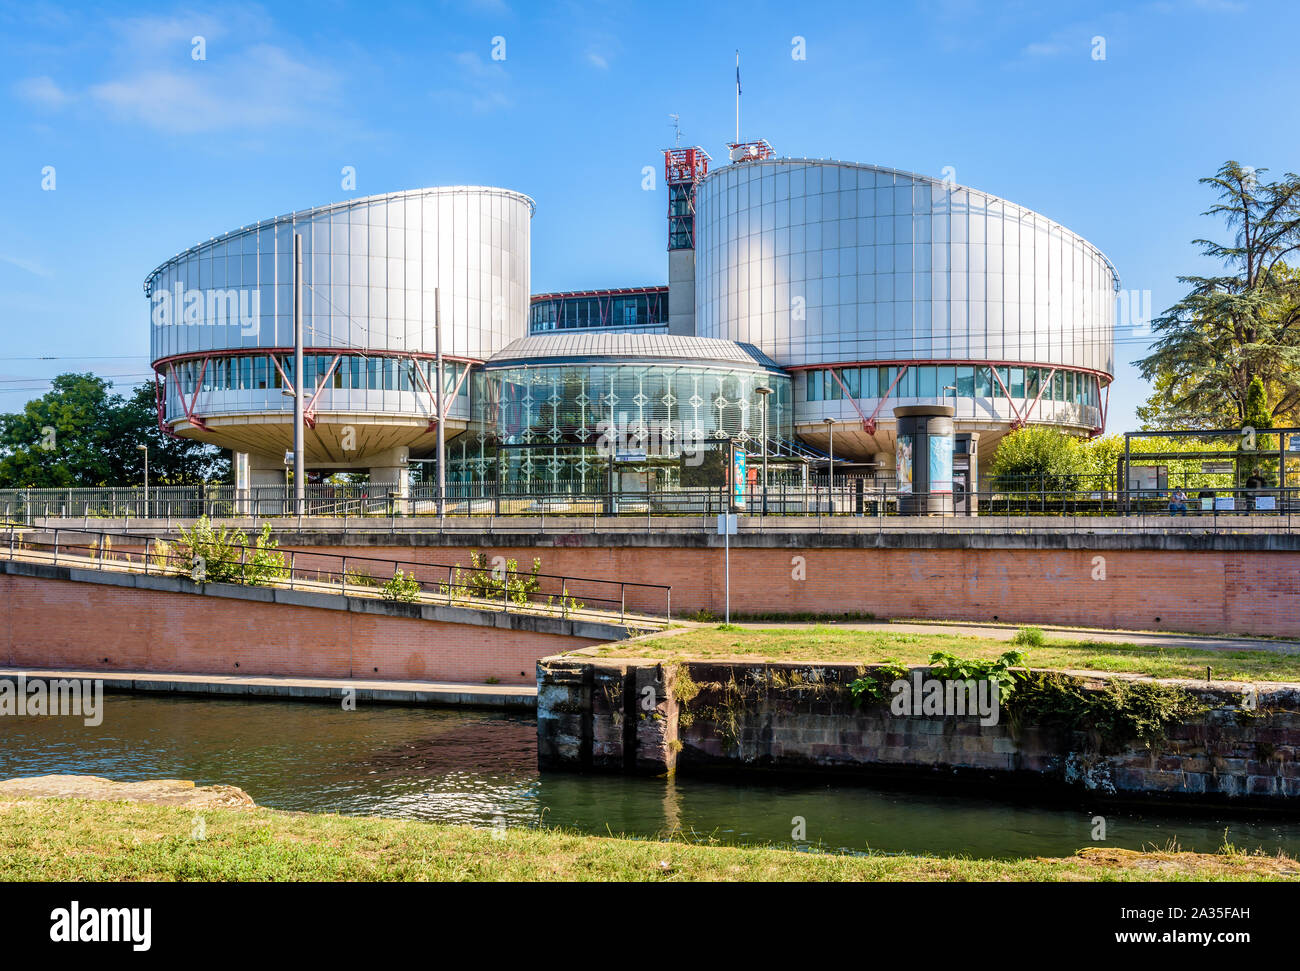 The building of the European Court of Human Rights in Strasbourg, France was designed by Richard Rogers and built in 1995 by the Marne-Rhine canal. Stock Photo